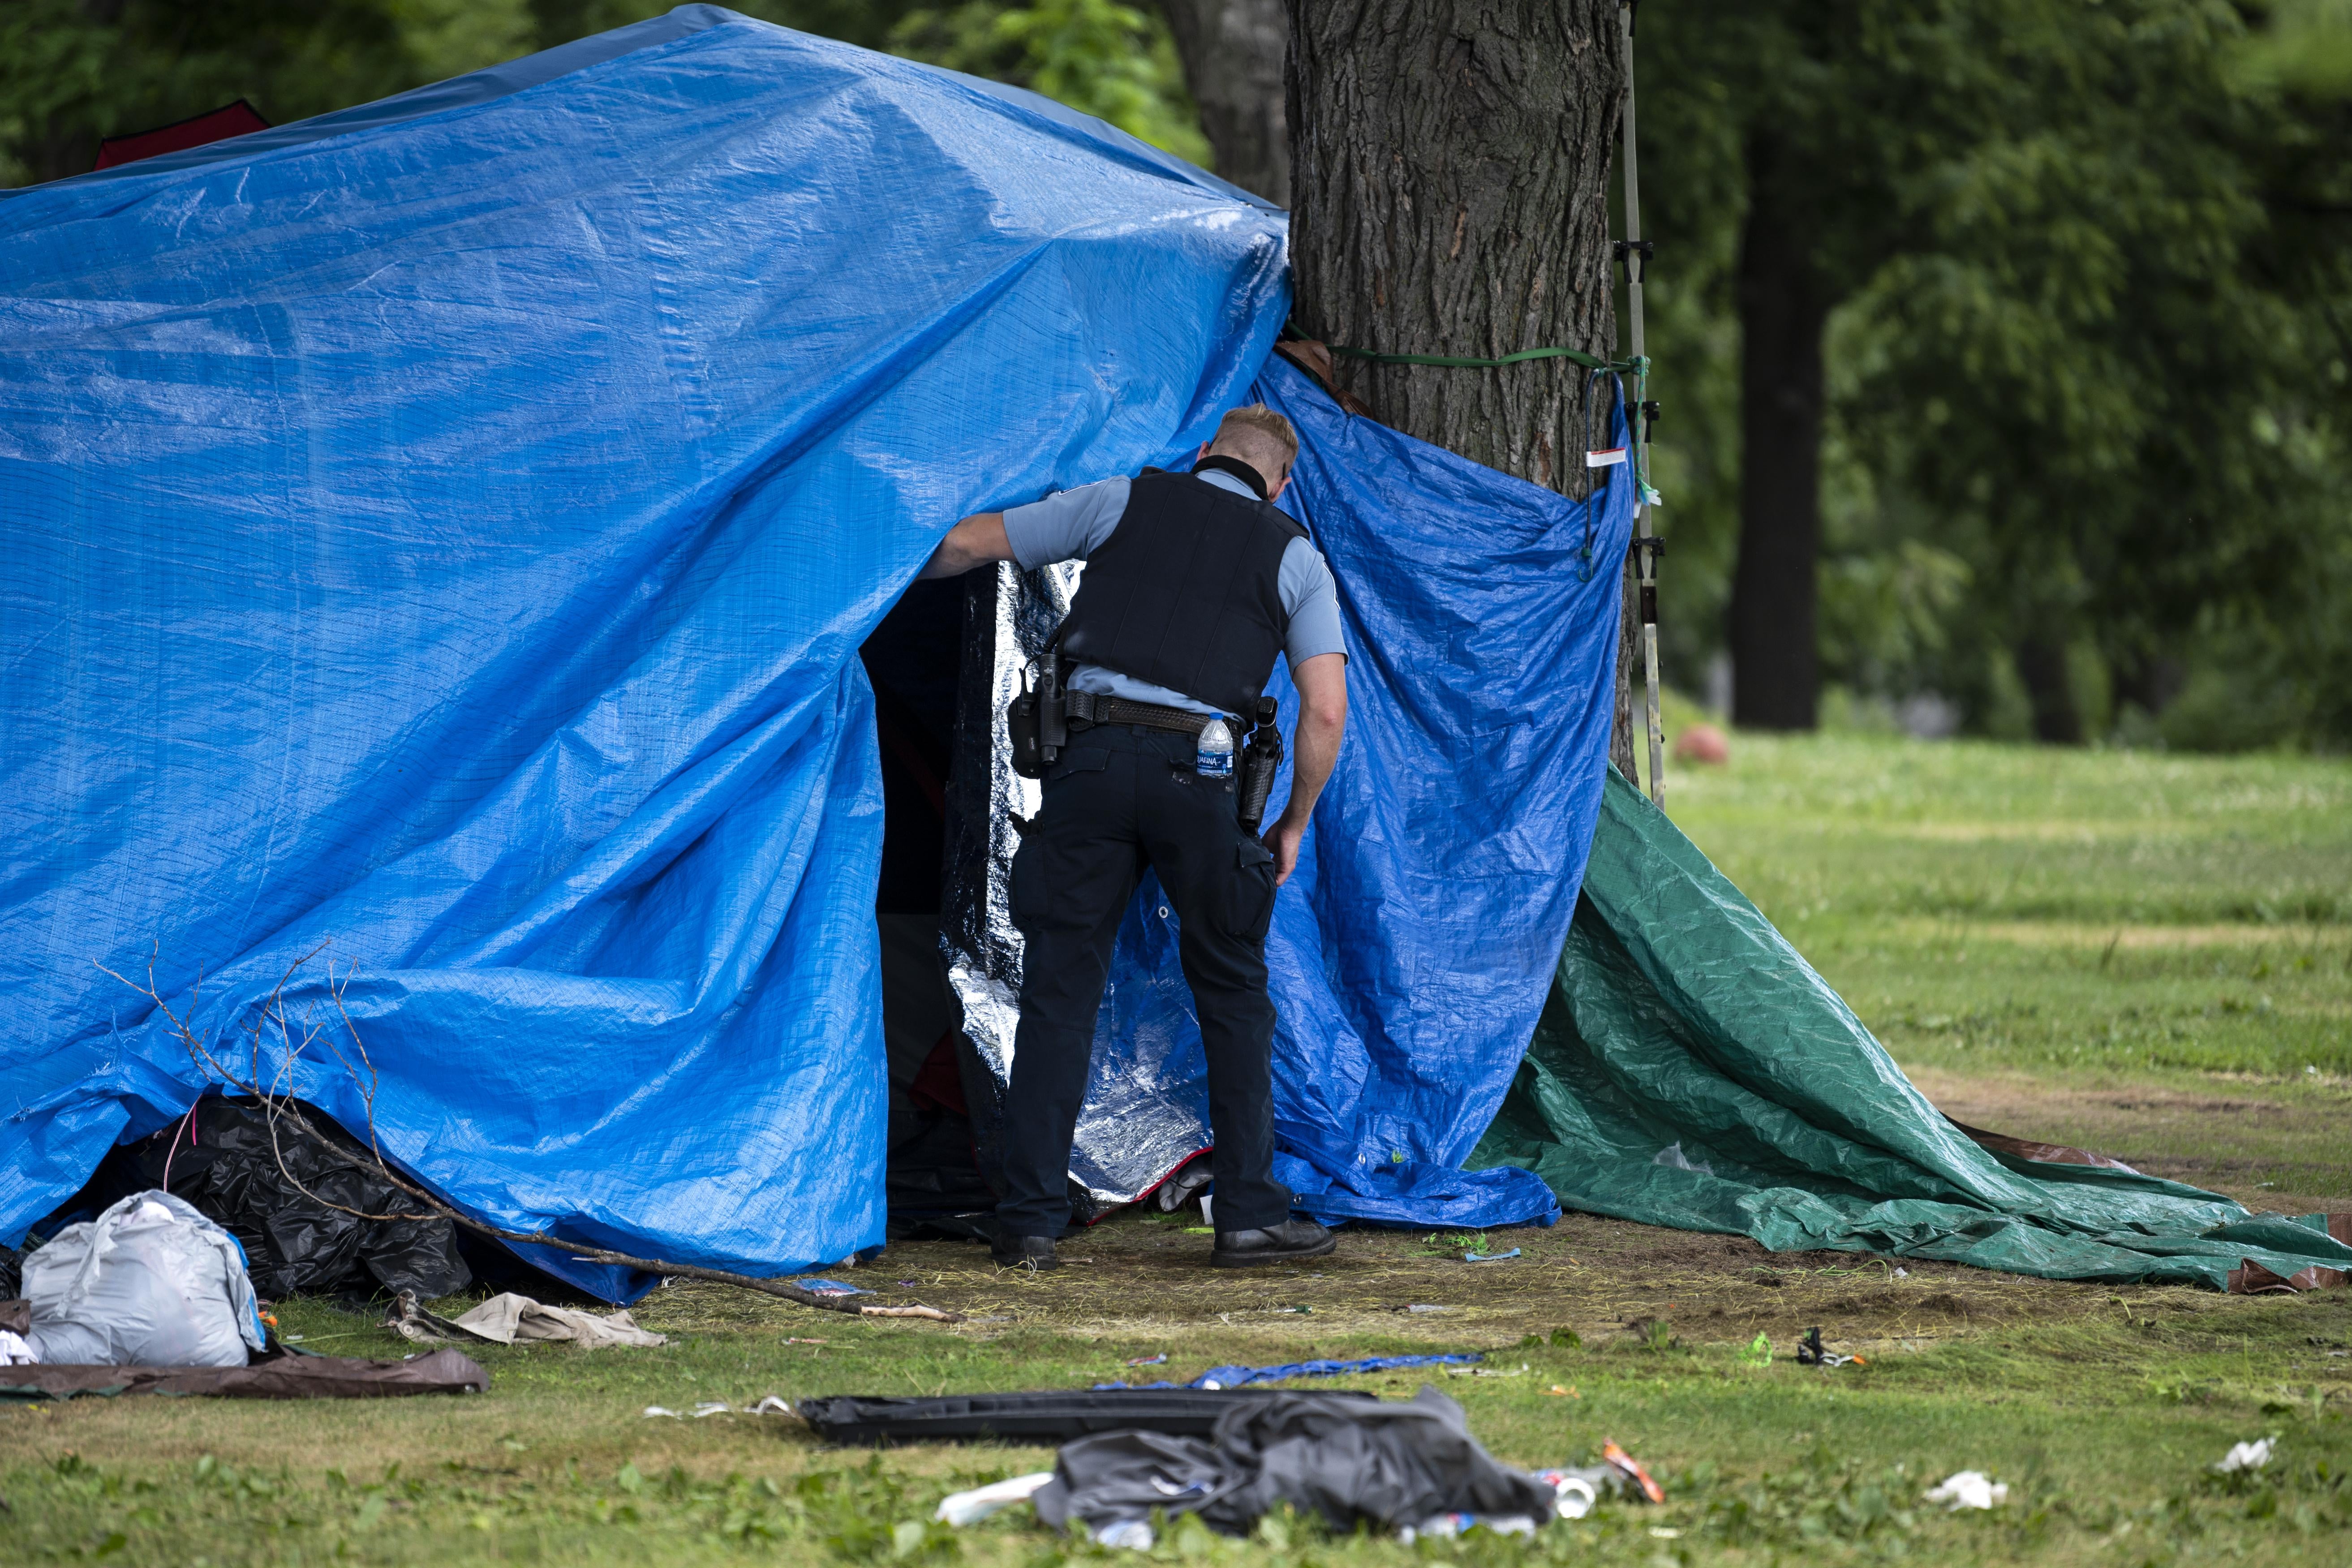 A man in a police uniform peers behind a tarp over a tent.